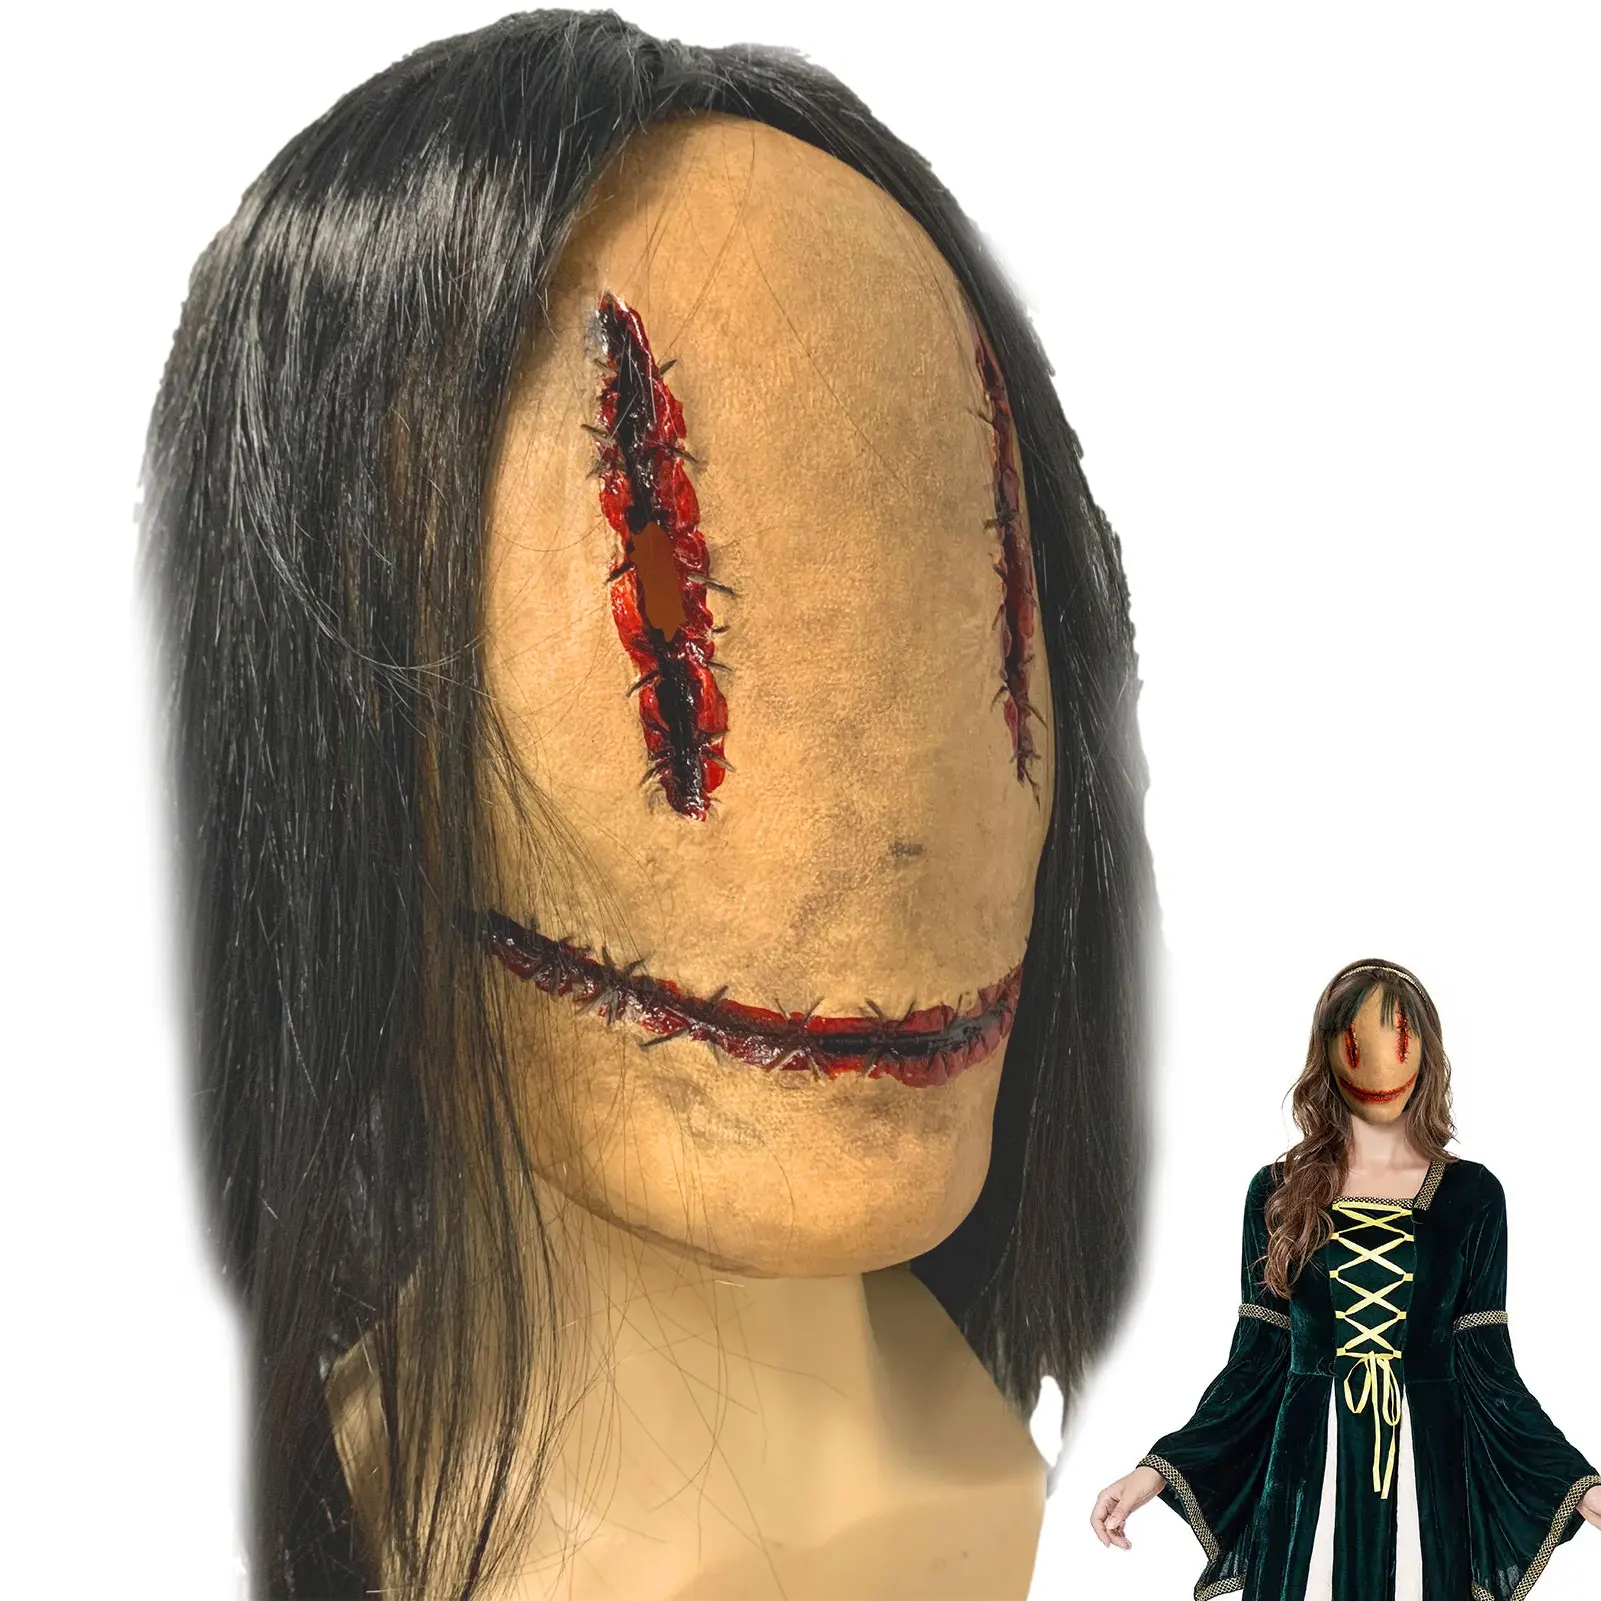 

Halloween Stitched Face Cover Scary Women Ghost Latex Full Face Cover Halloween Head Cover Cosplay Party Costumes Supplies